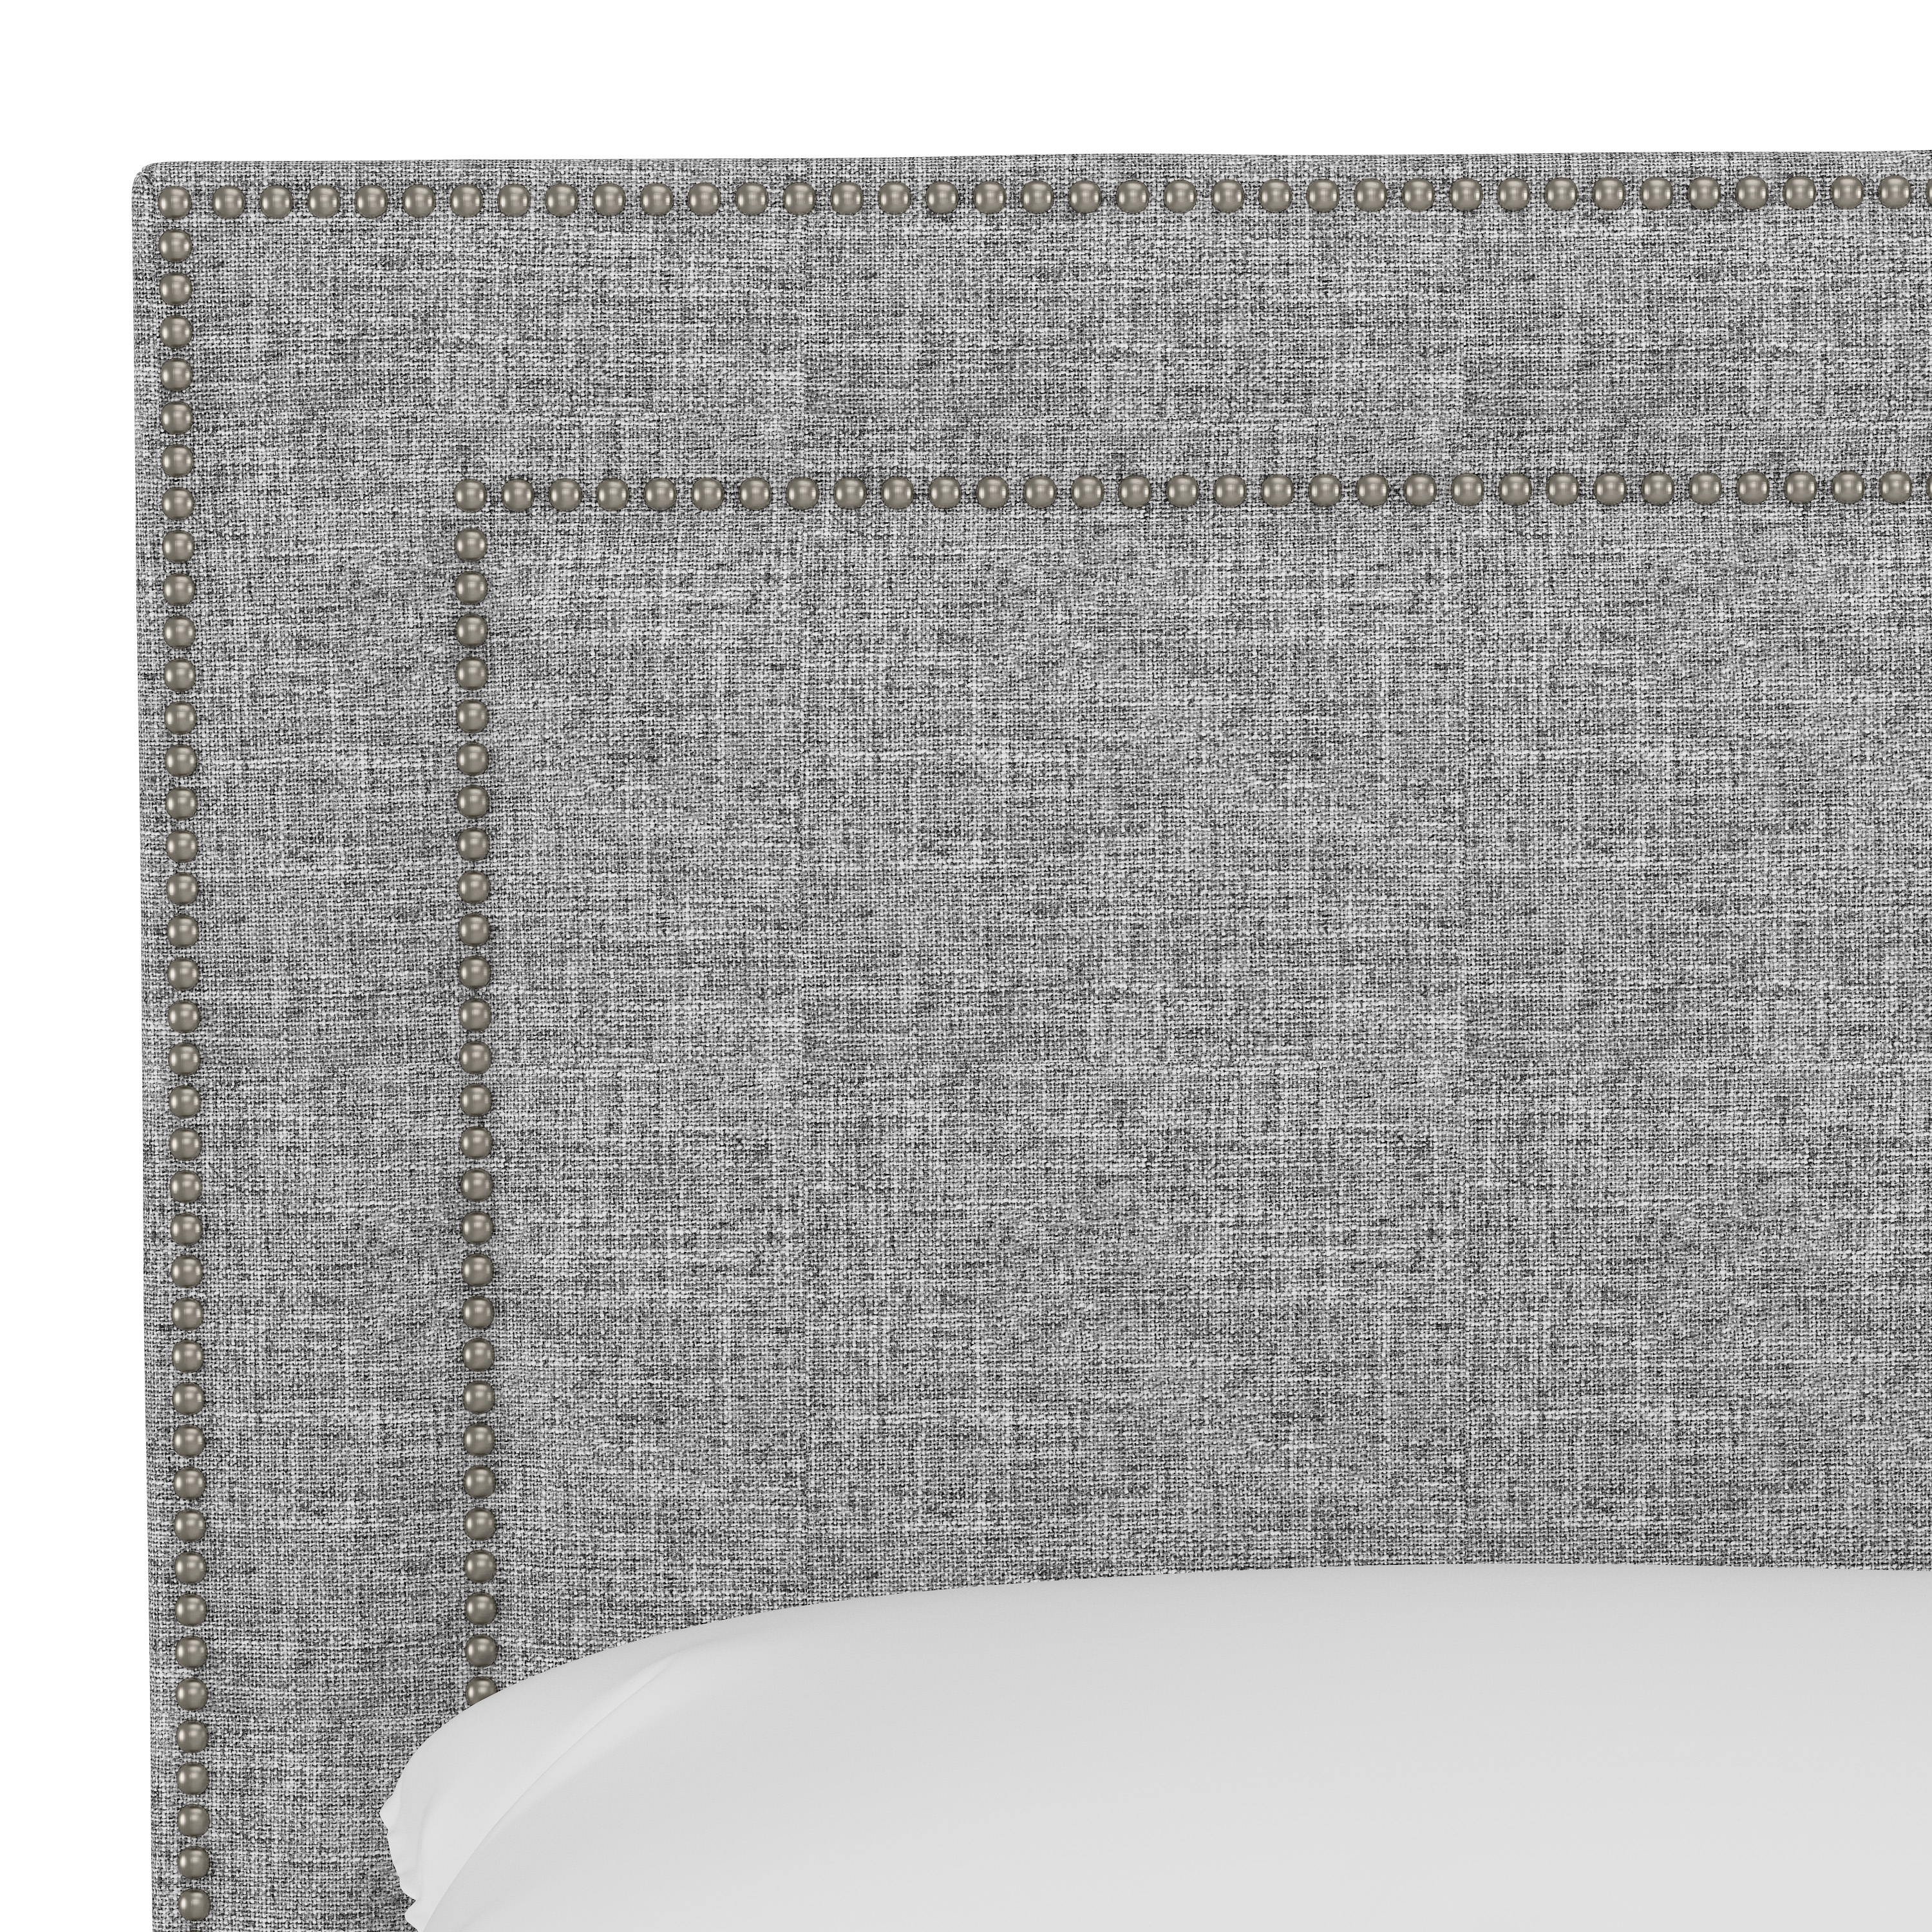 Williams Bed, Queen, Pumice, Pewter Nailheads - Image 3